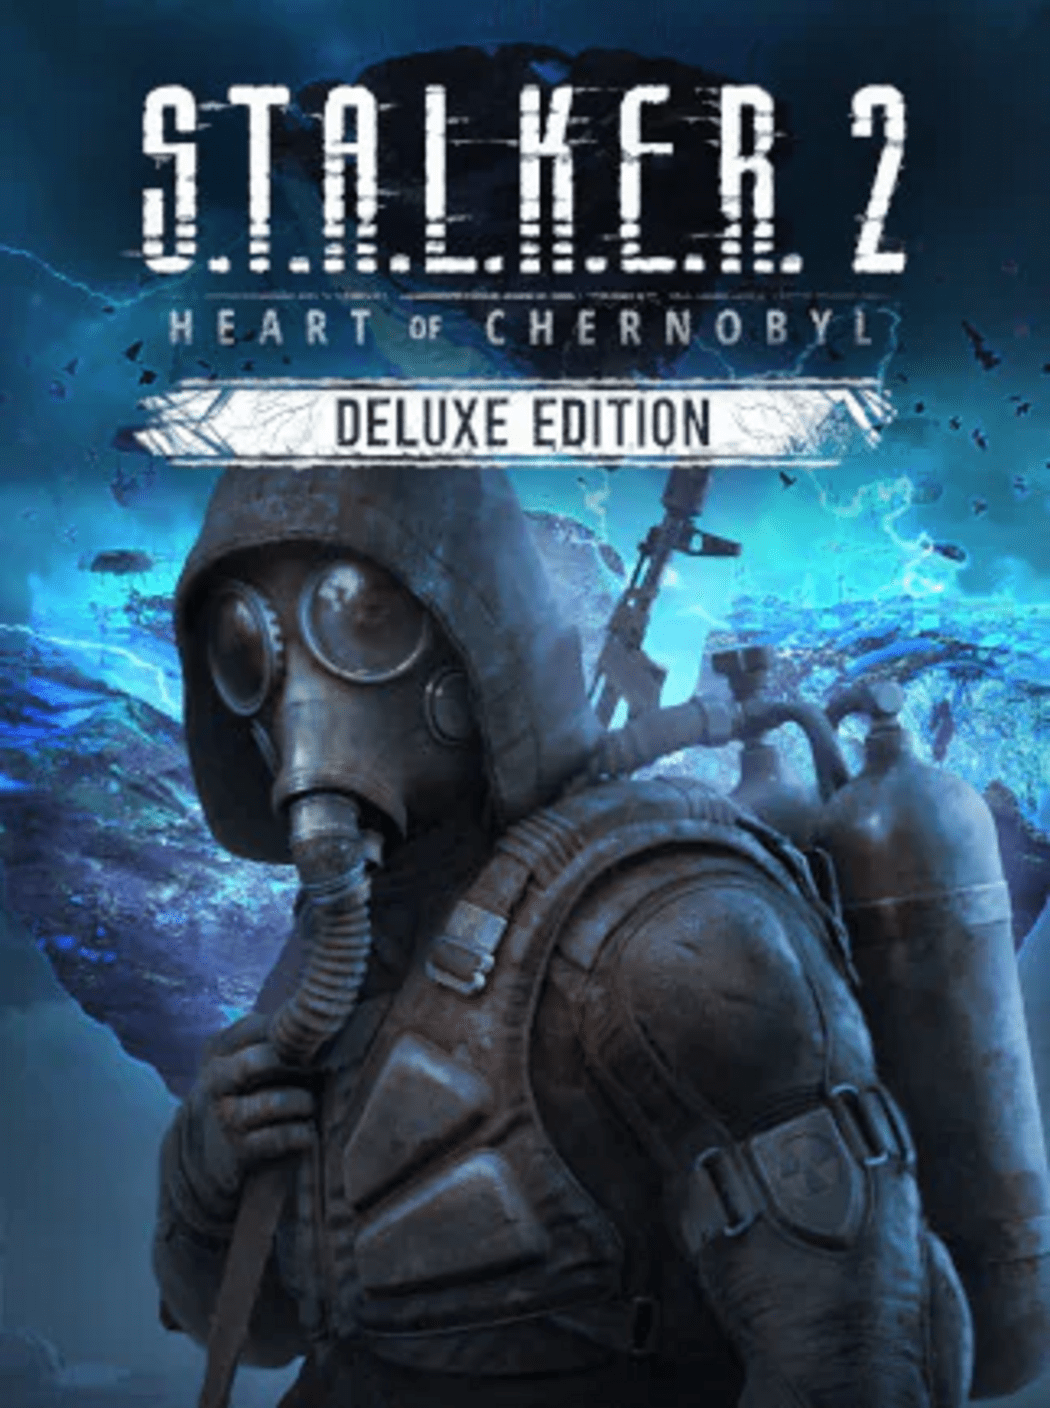 Reserva  S.T.A.L.K.E.R. 2: Heart of Chornobyl — Physical Edition